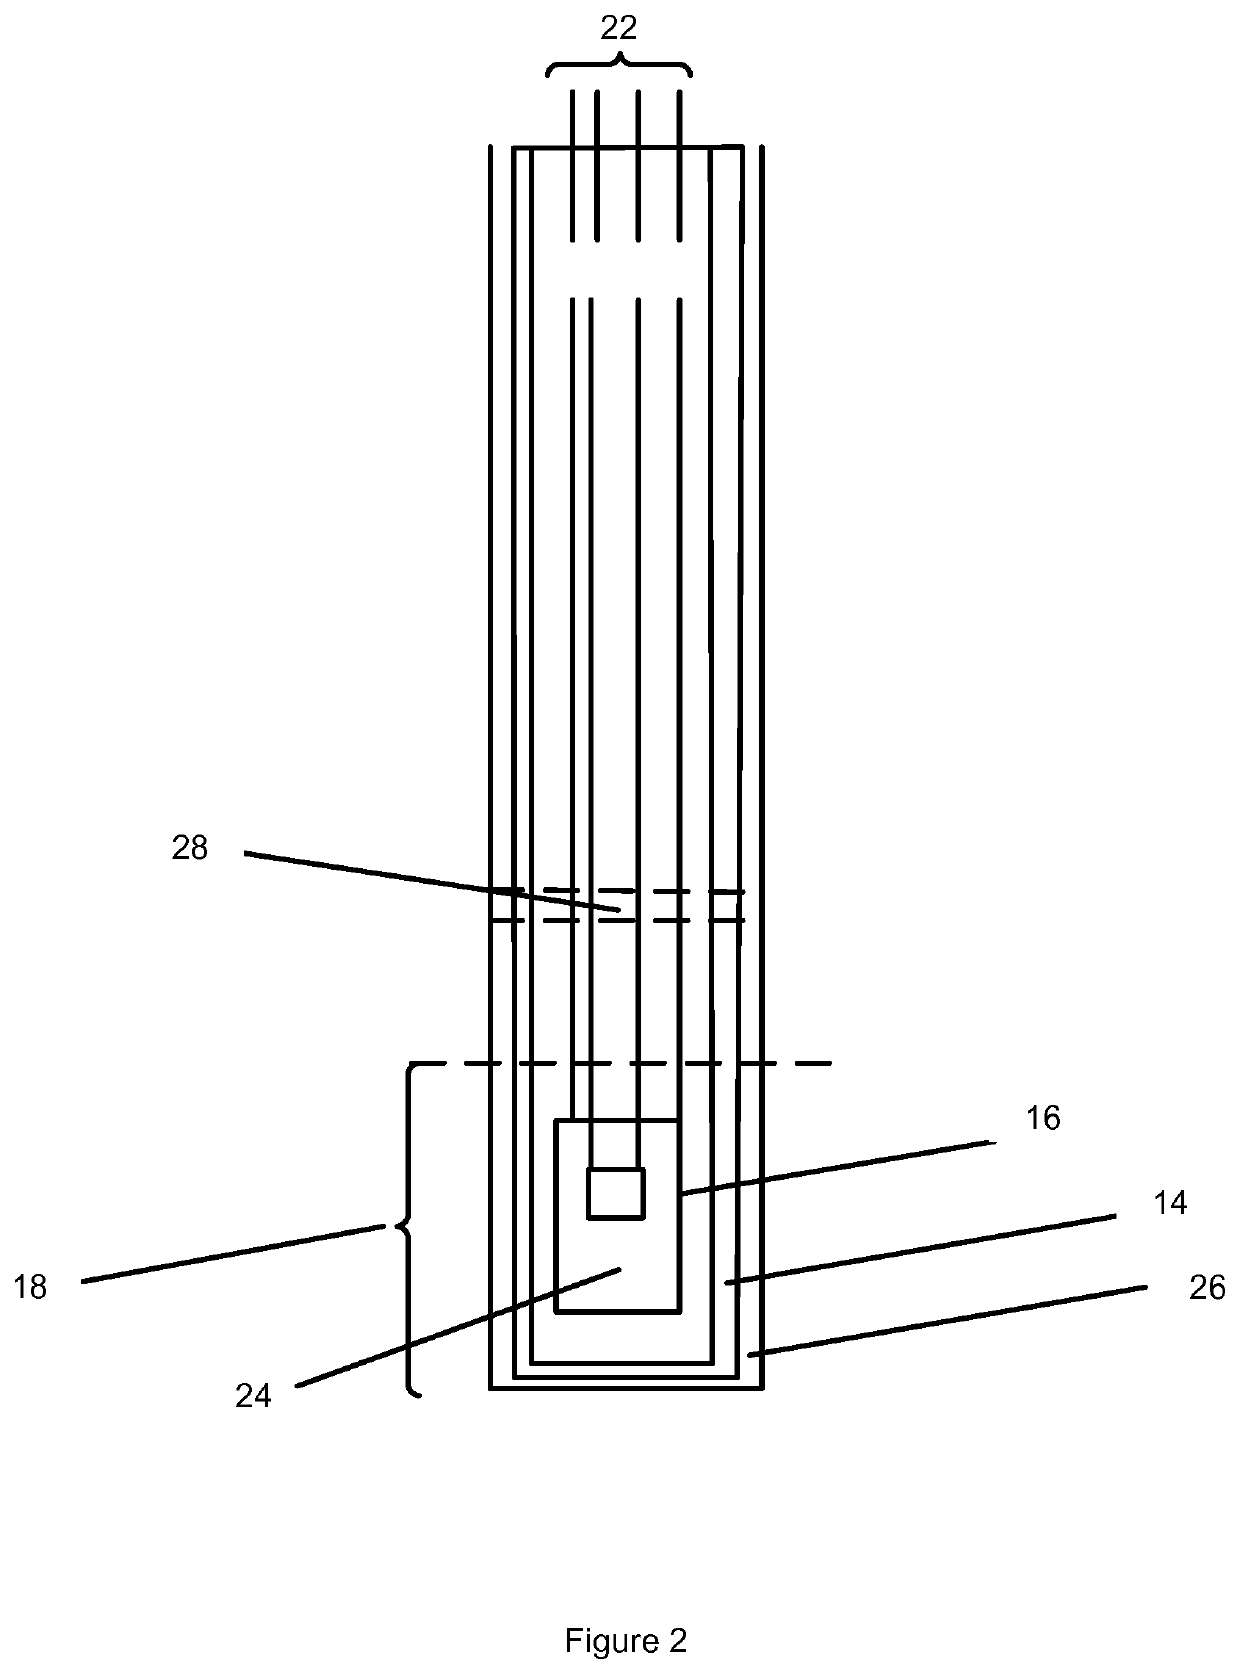 Device and system for fluid flow measurement